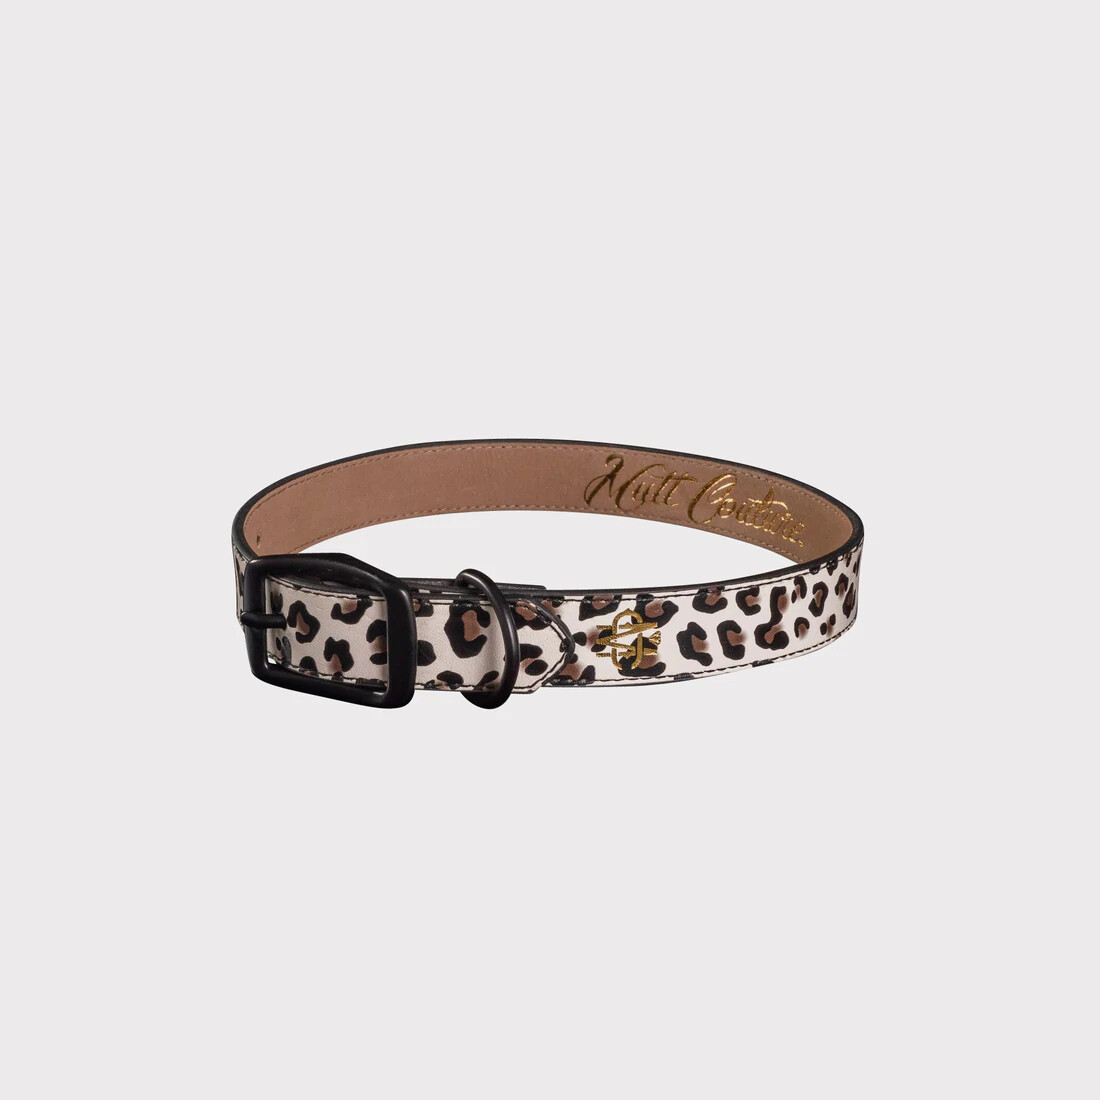 Mutt Couture Leopard Print Leather Dog Collar